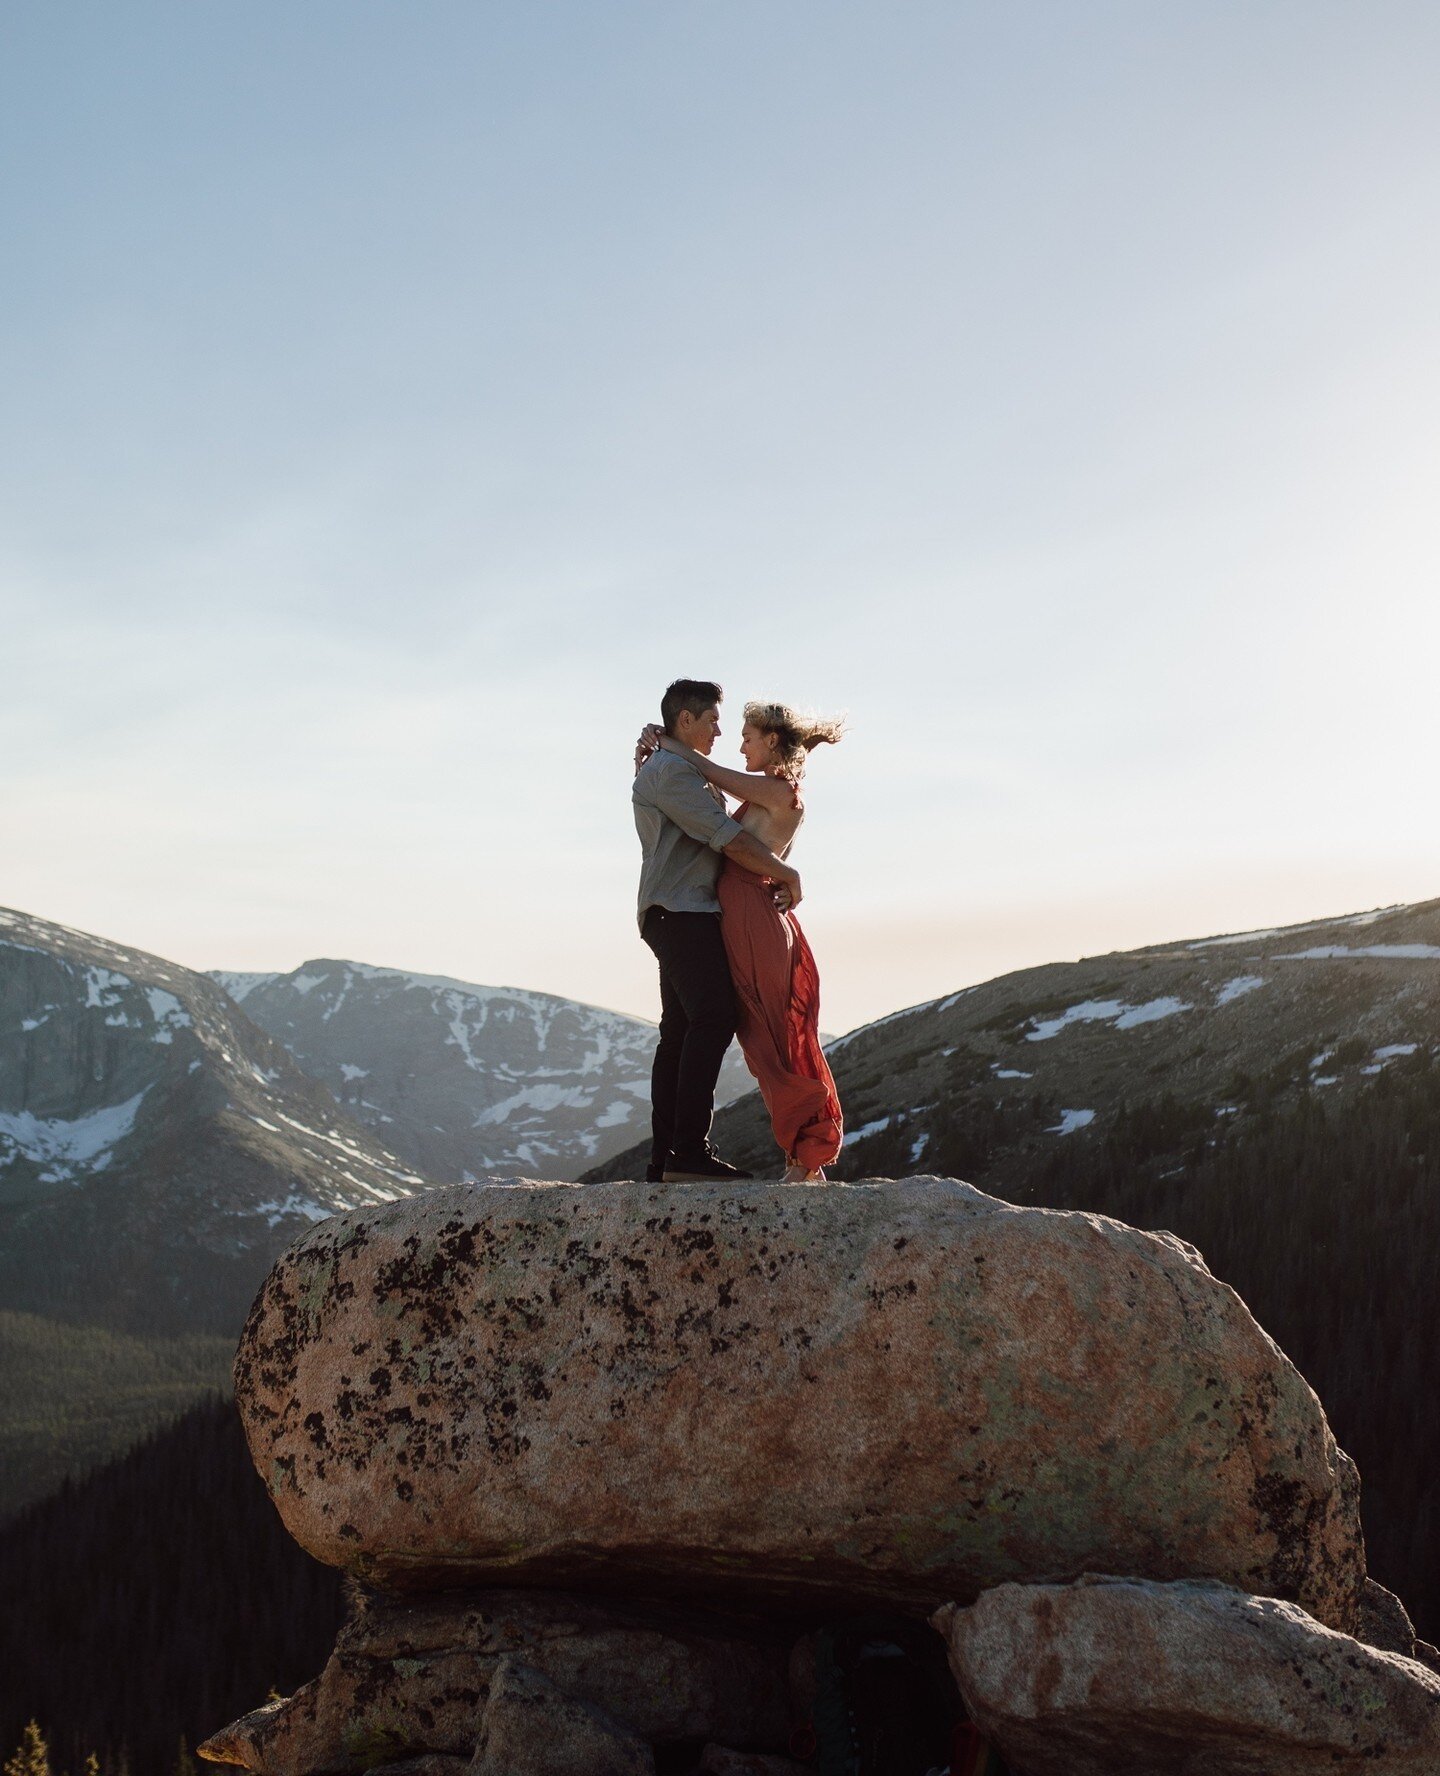 Through every sunrise and every sunset  ⁠
⁠
Even if you're having your wedding in your town, there are plenty of ways to still capture those epic destination photos. Here are a few ideas: ⁠
⁠
- destination engagement session: pack up your fiance an